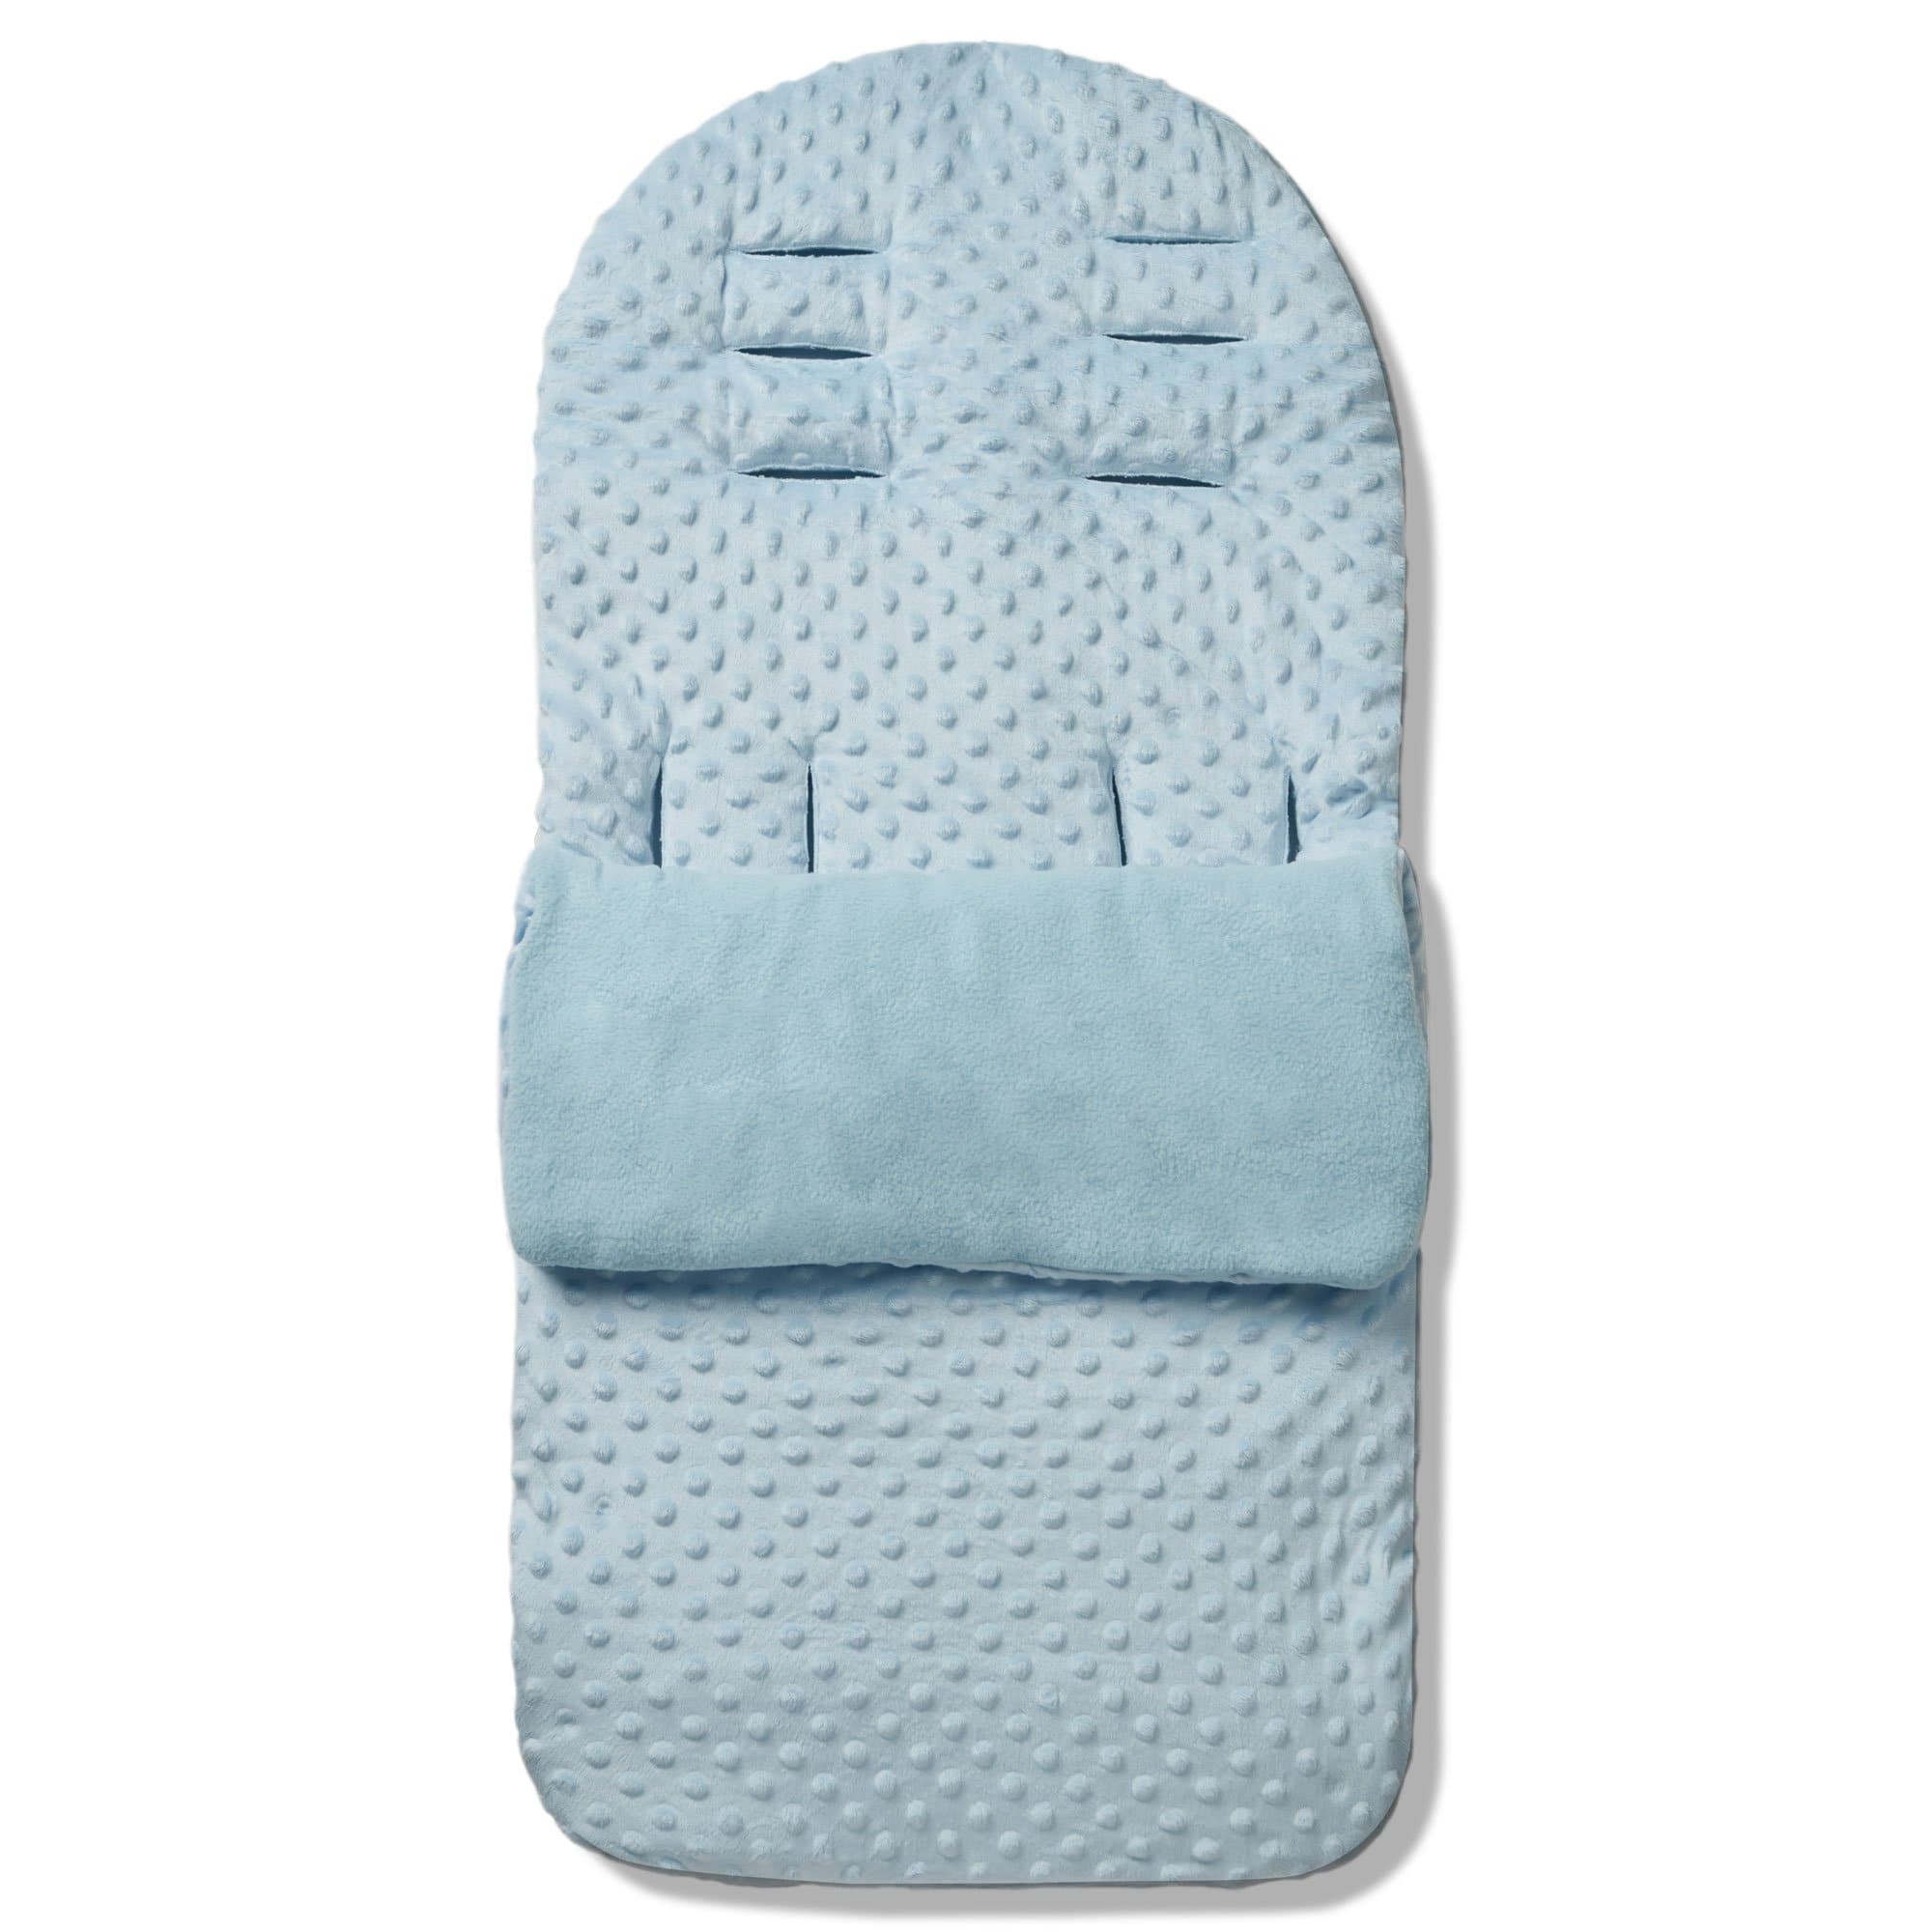 Dimple Footmuff / Cosy Toes Compatible with Casual - Blue / Fits All Models | For Your Little One